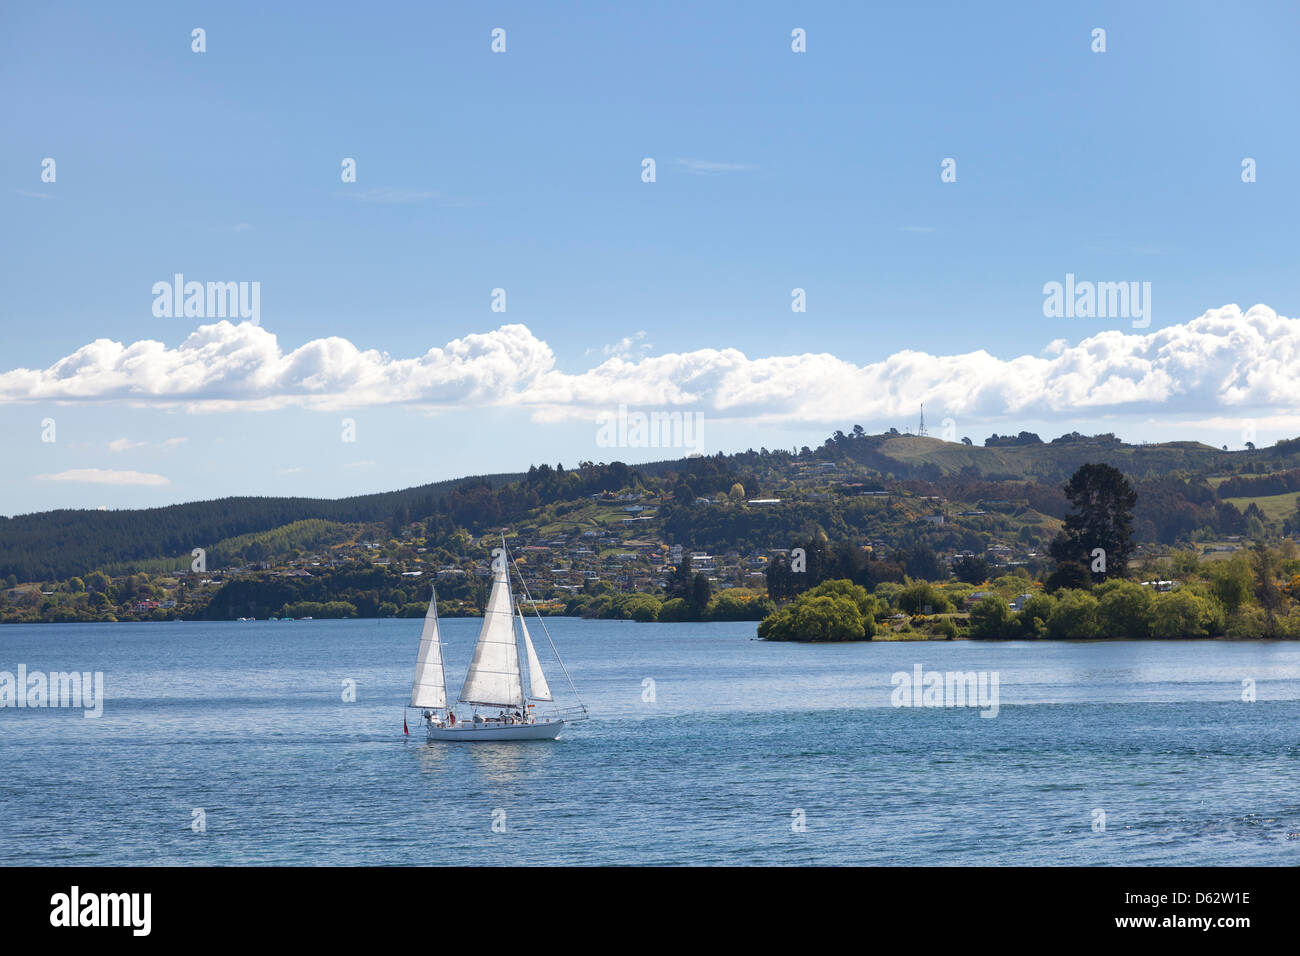 Lake Taupo from Taupo with a sailing vessel Stock Photo